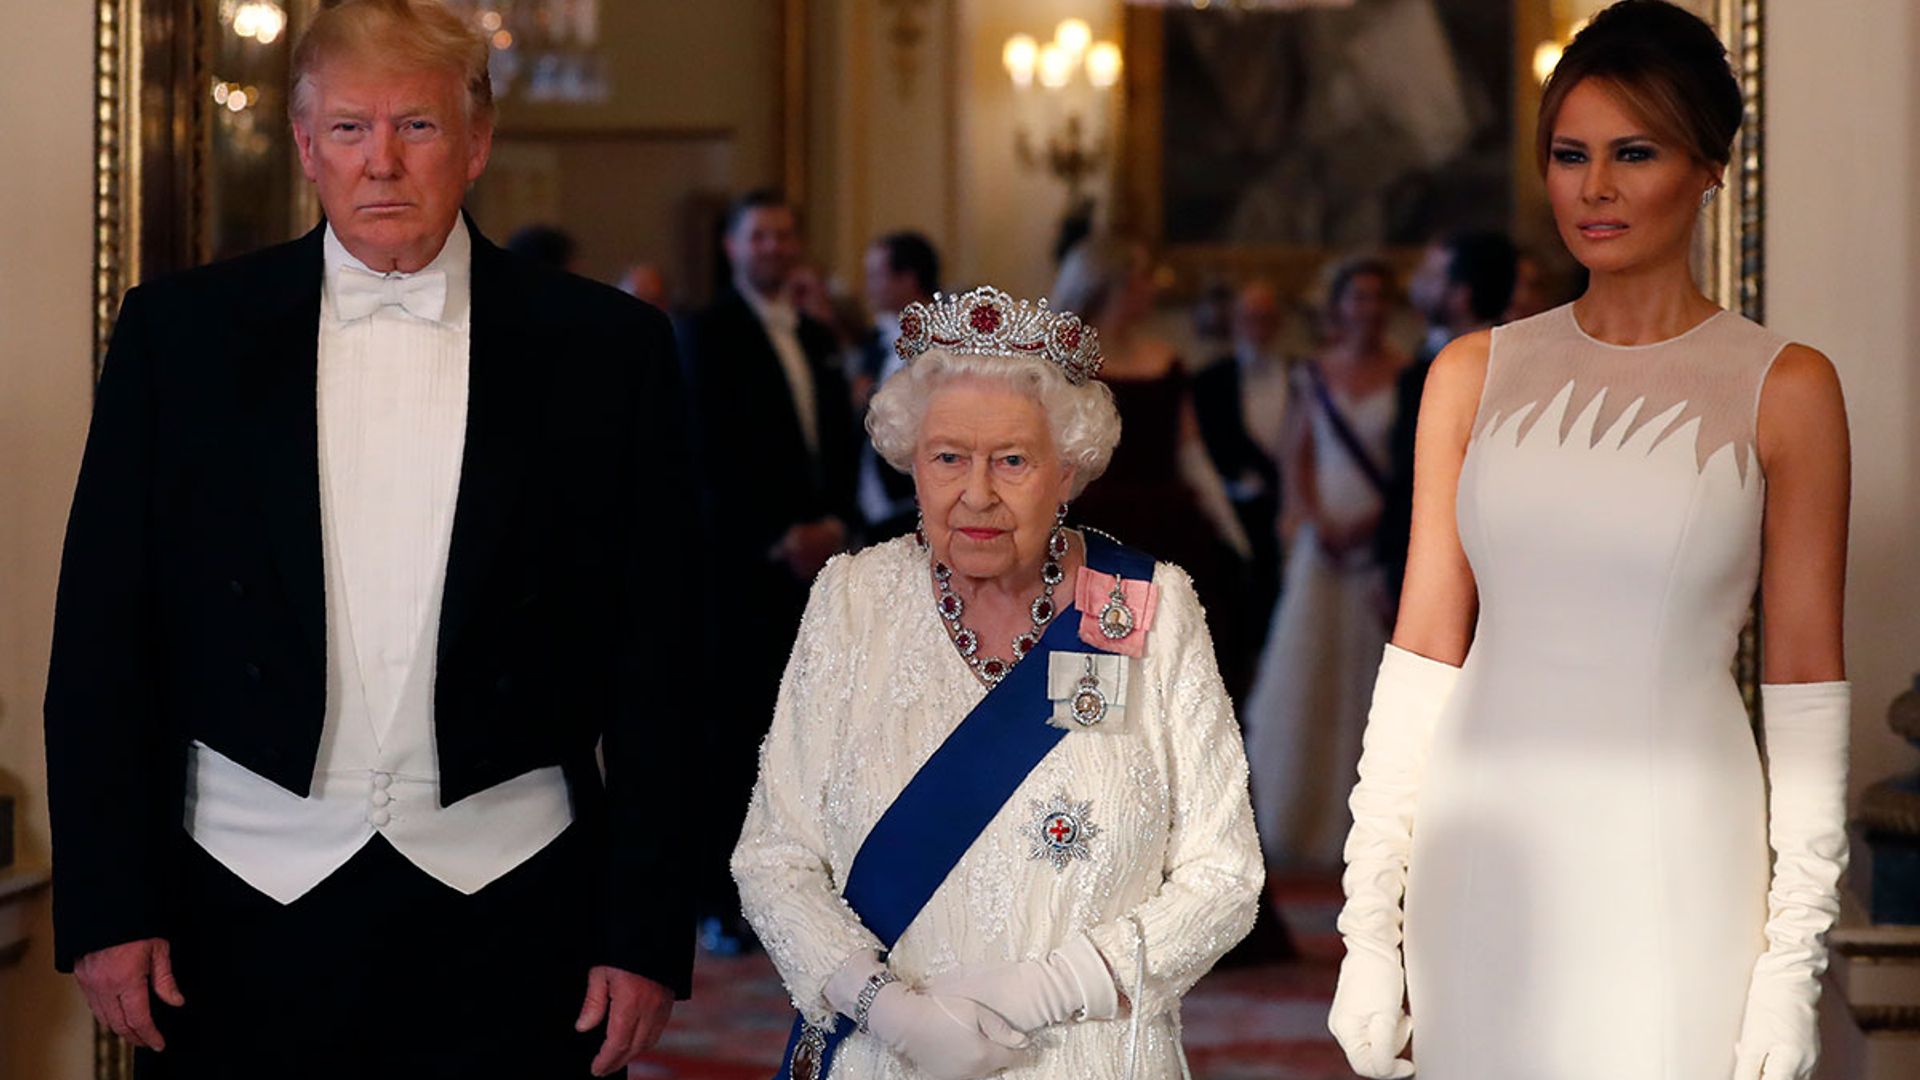 The Queen unfazed by Donald Trump's breach of protocol - see the picture